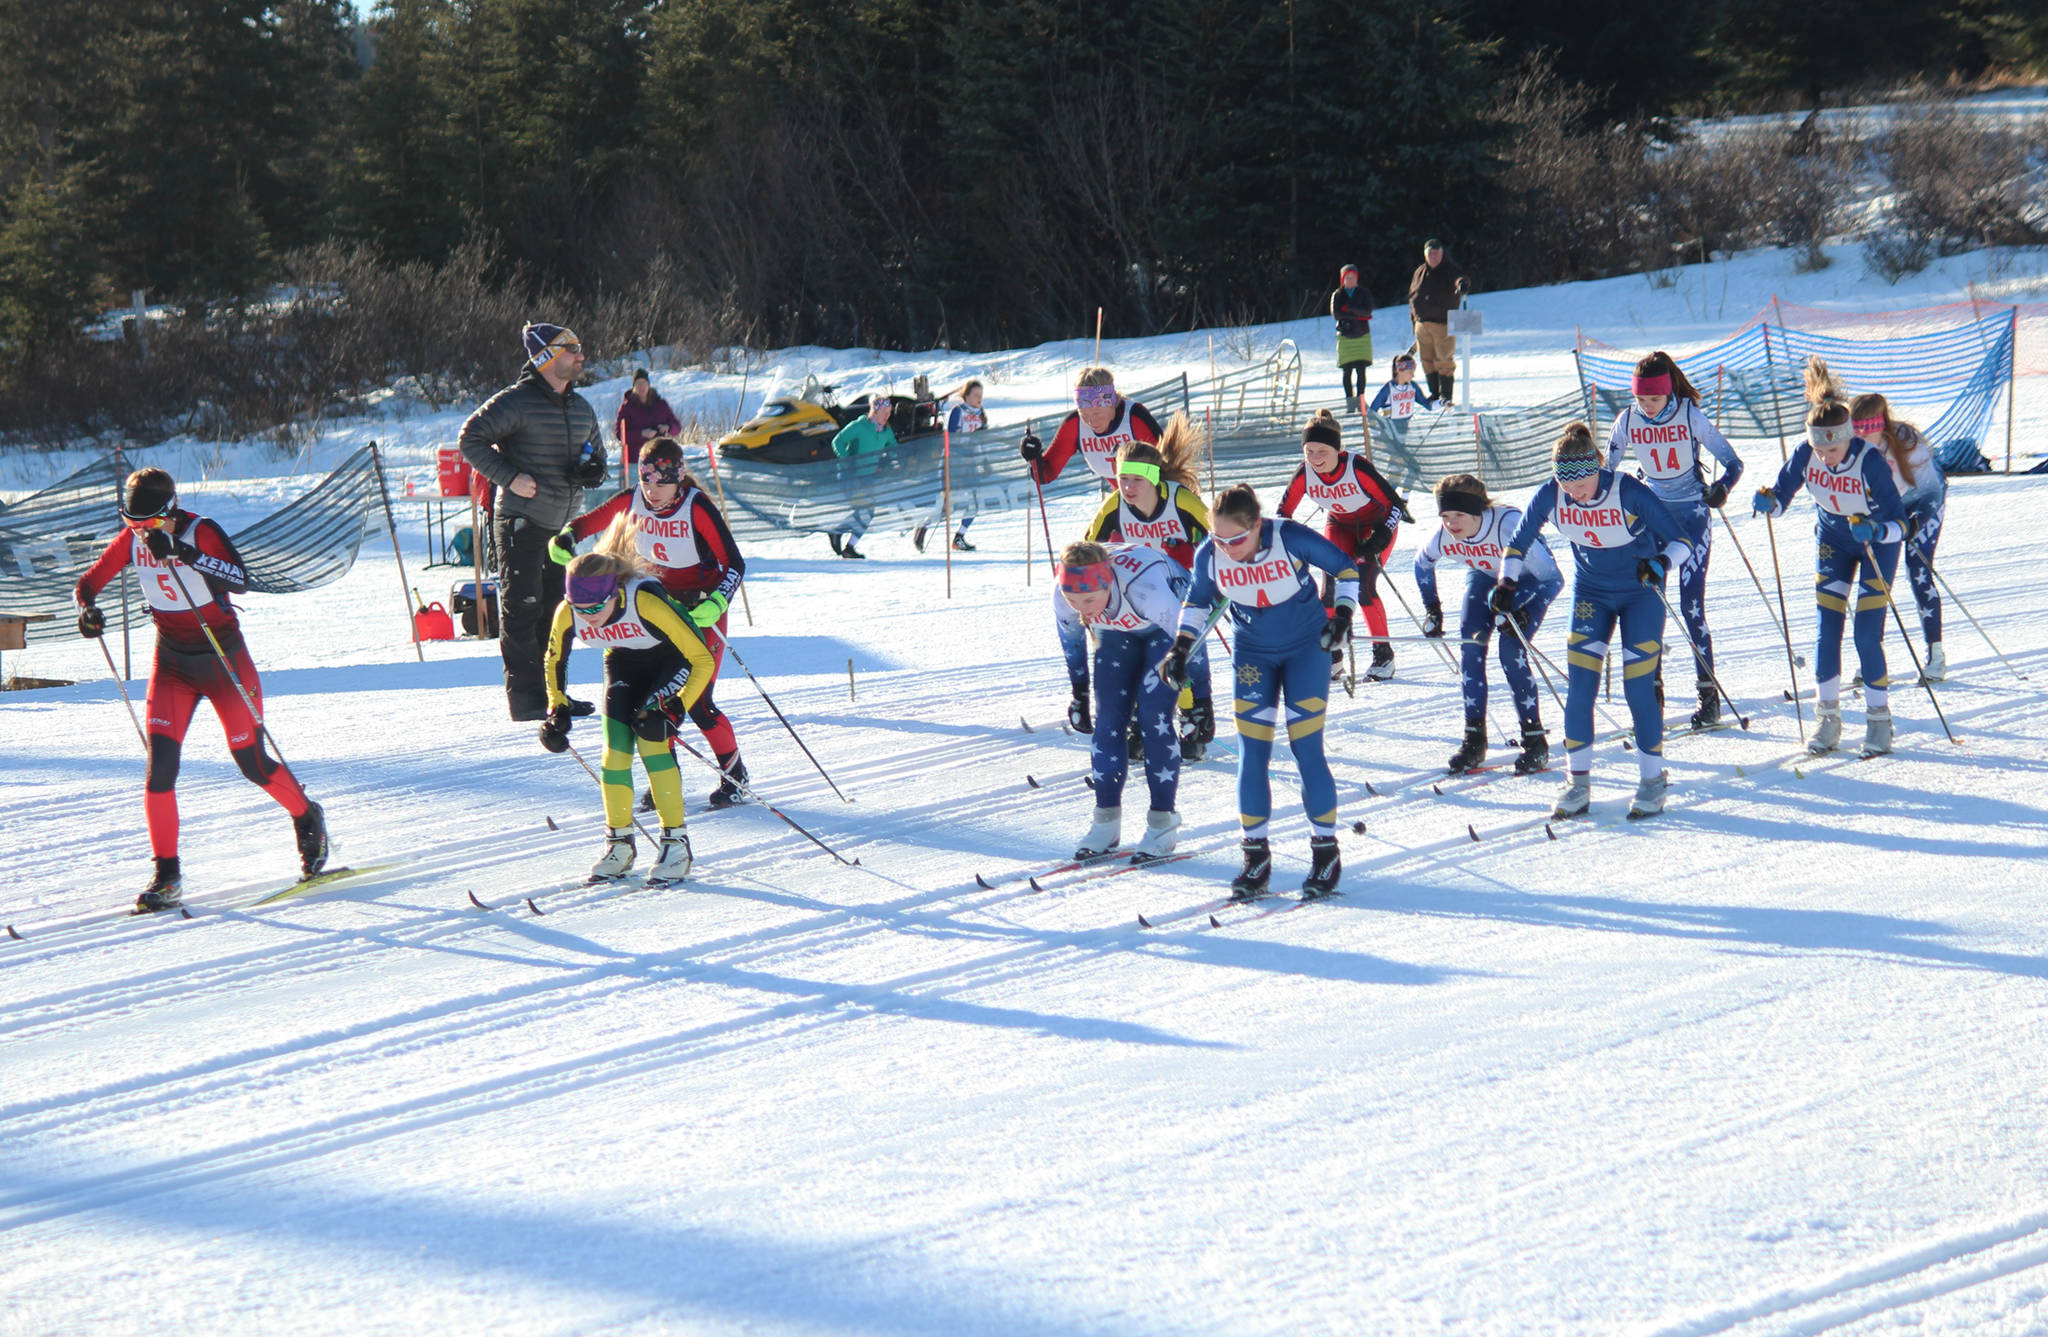 Skiers from Kenai Central High School, Soldotna High School, Homer High School and Seward High School take off from the starting line of the varsity girls’ 5 kilometer classic race Friday, Feb. 2, 2018 at an invitational at the Lookout Ski Trails near Homer, Alaska. (Photo by Megan Pacer/Homer News)